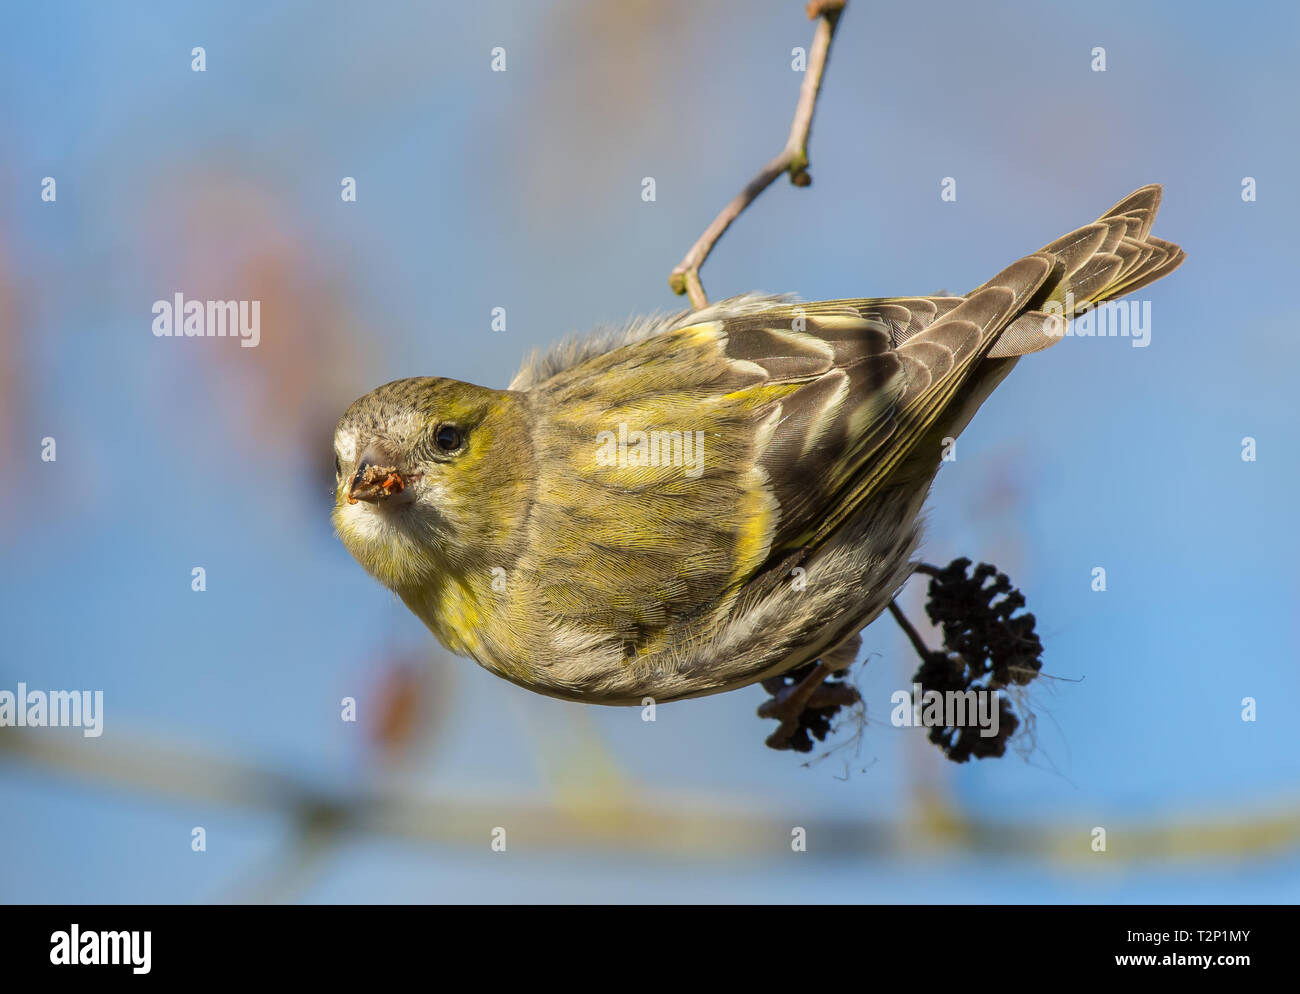 Detailed, front view close up of wild, female UK siskin bird (Carduelis spinus) isolated outdoors, perched on natural twig in spring sunshine. Stock Photo